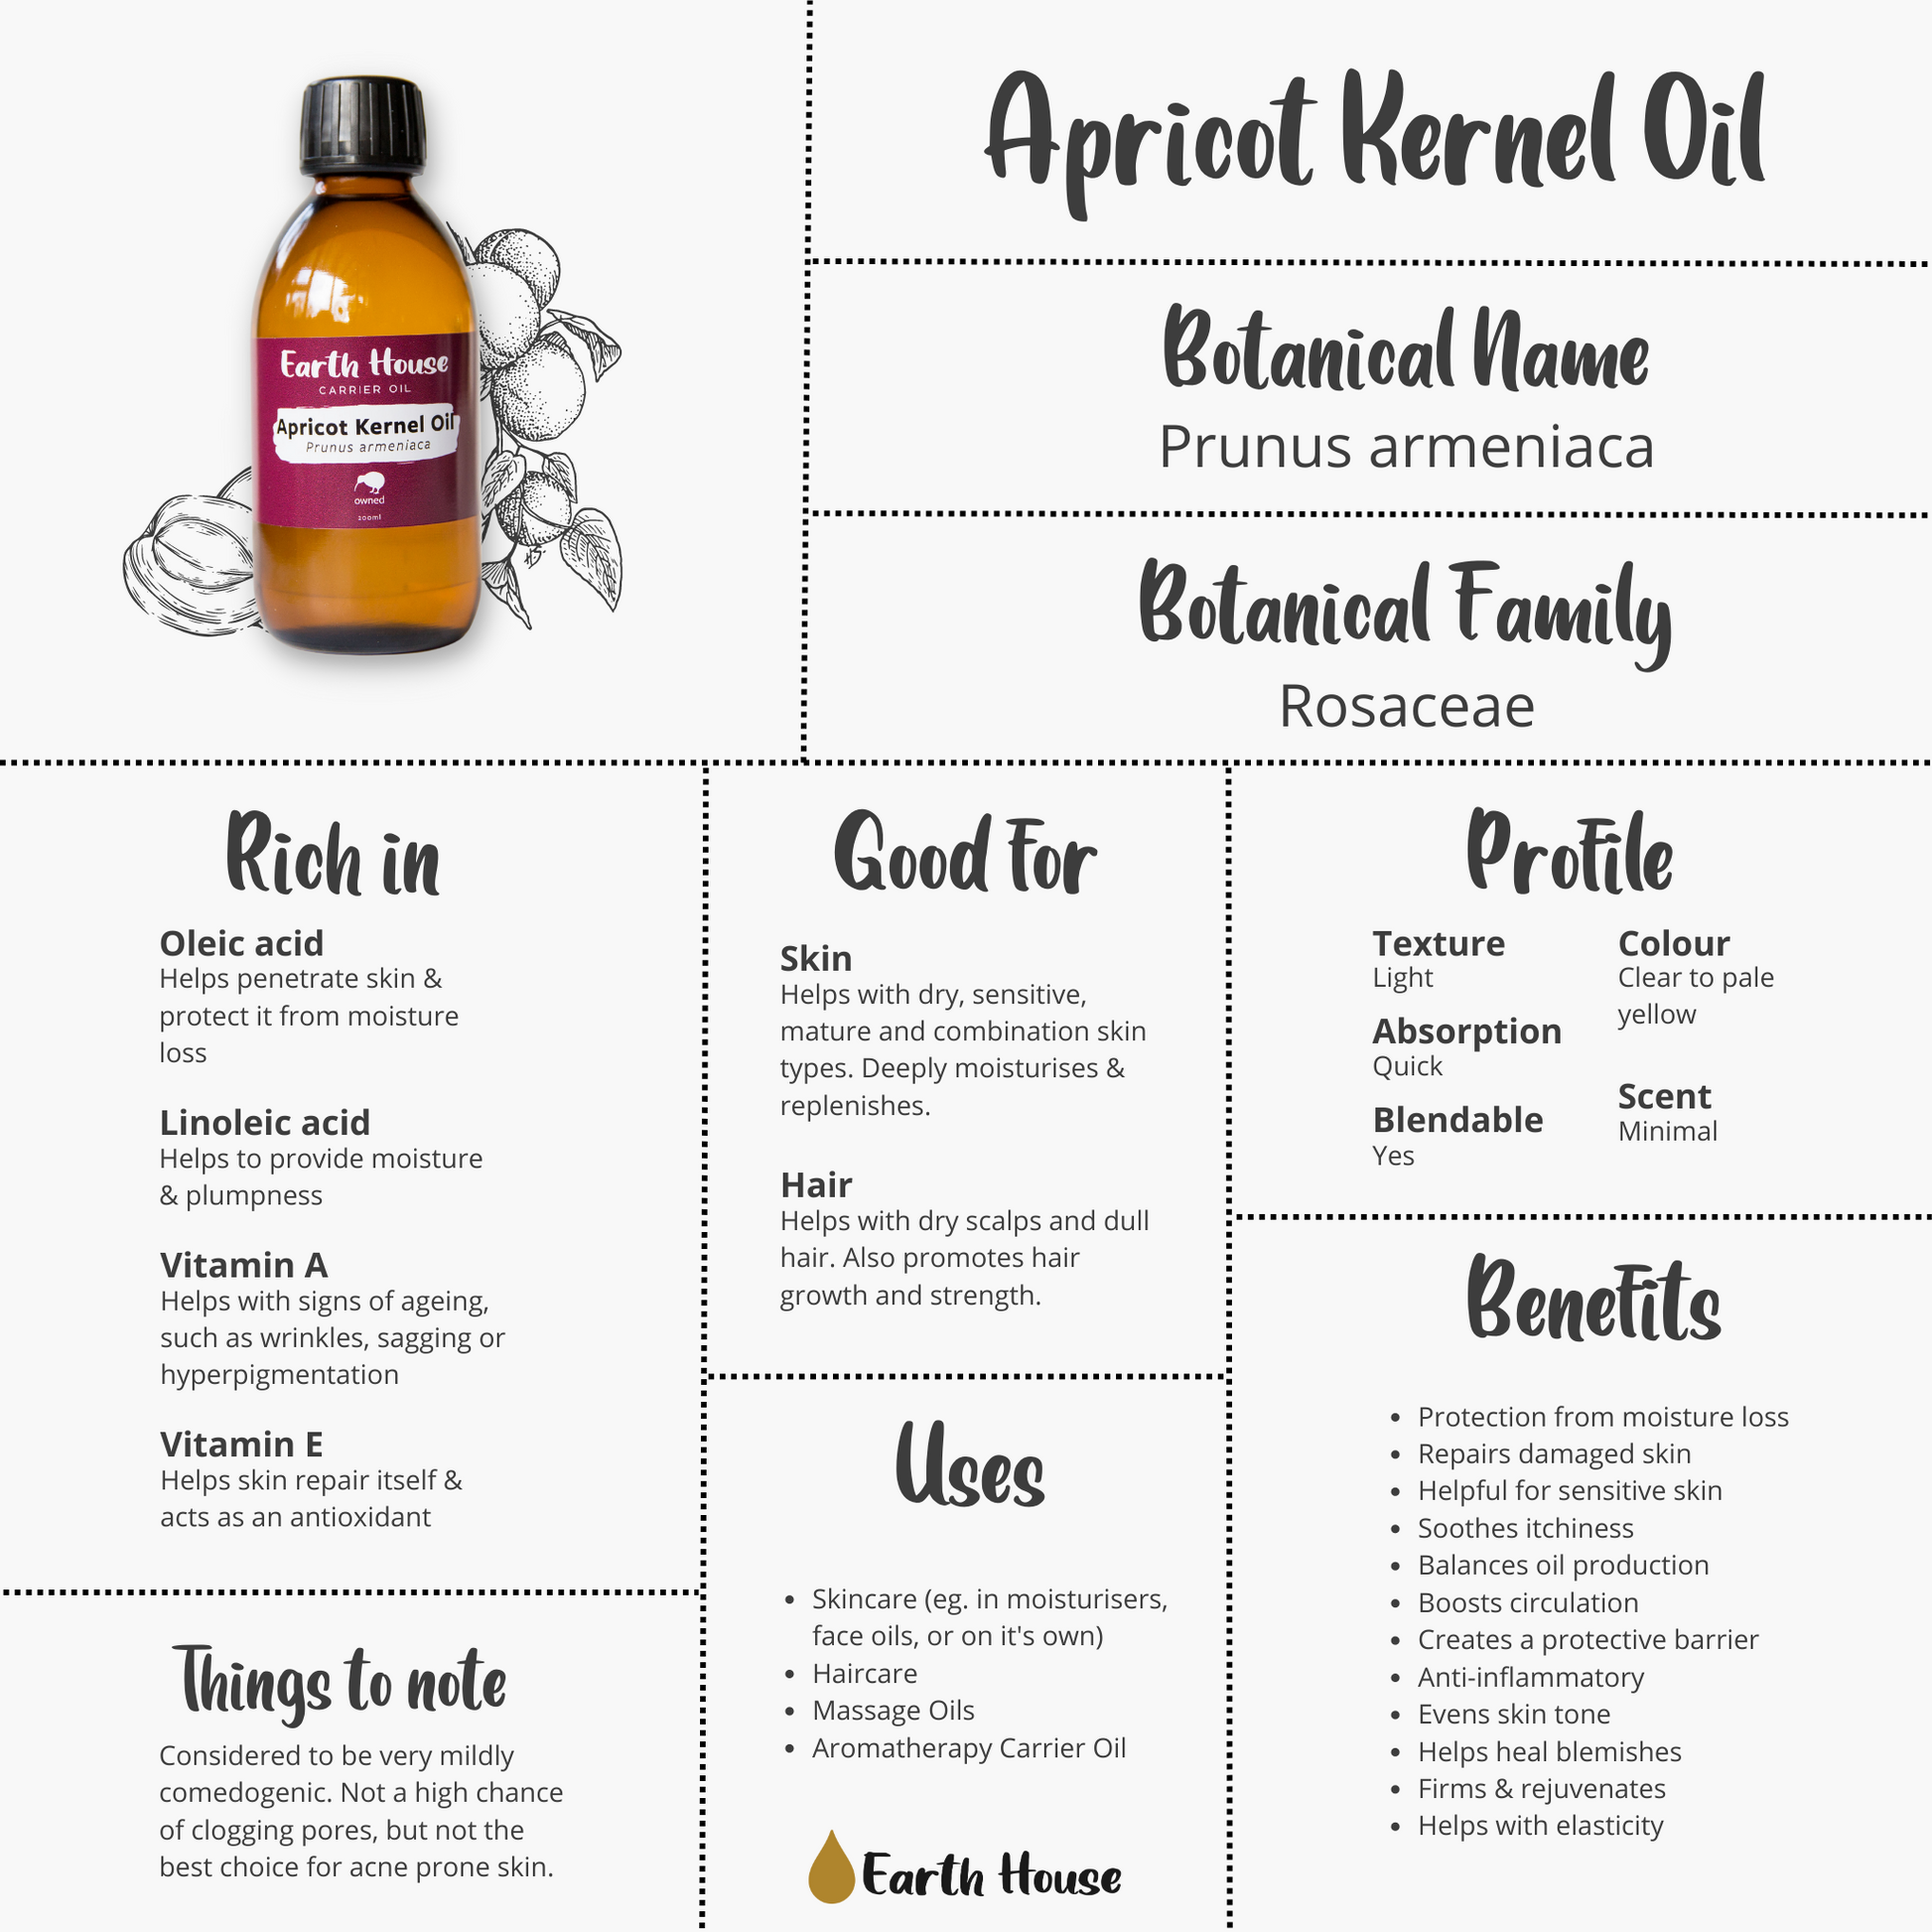 Infographic outlining the potential benefits of Apricot Kernel Oil